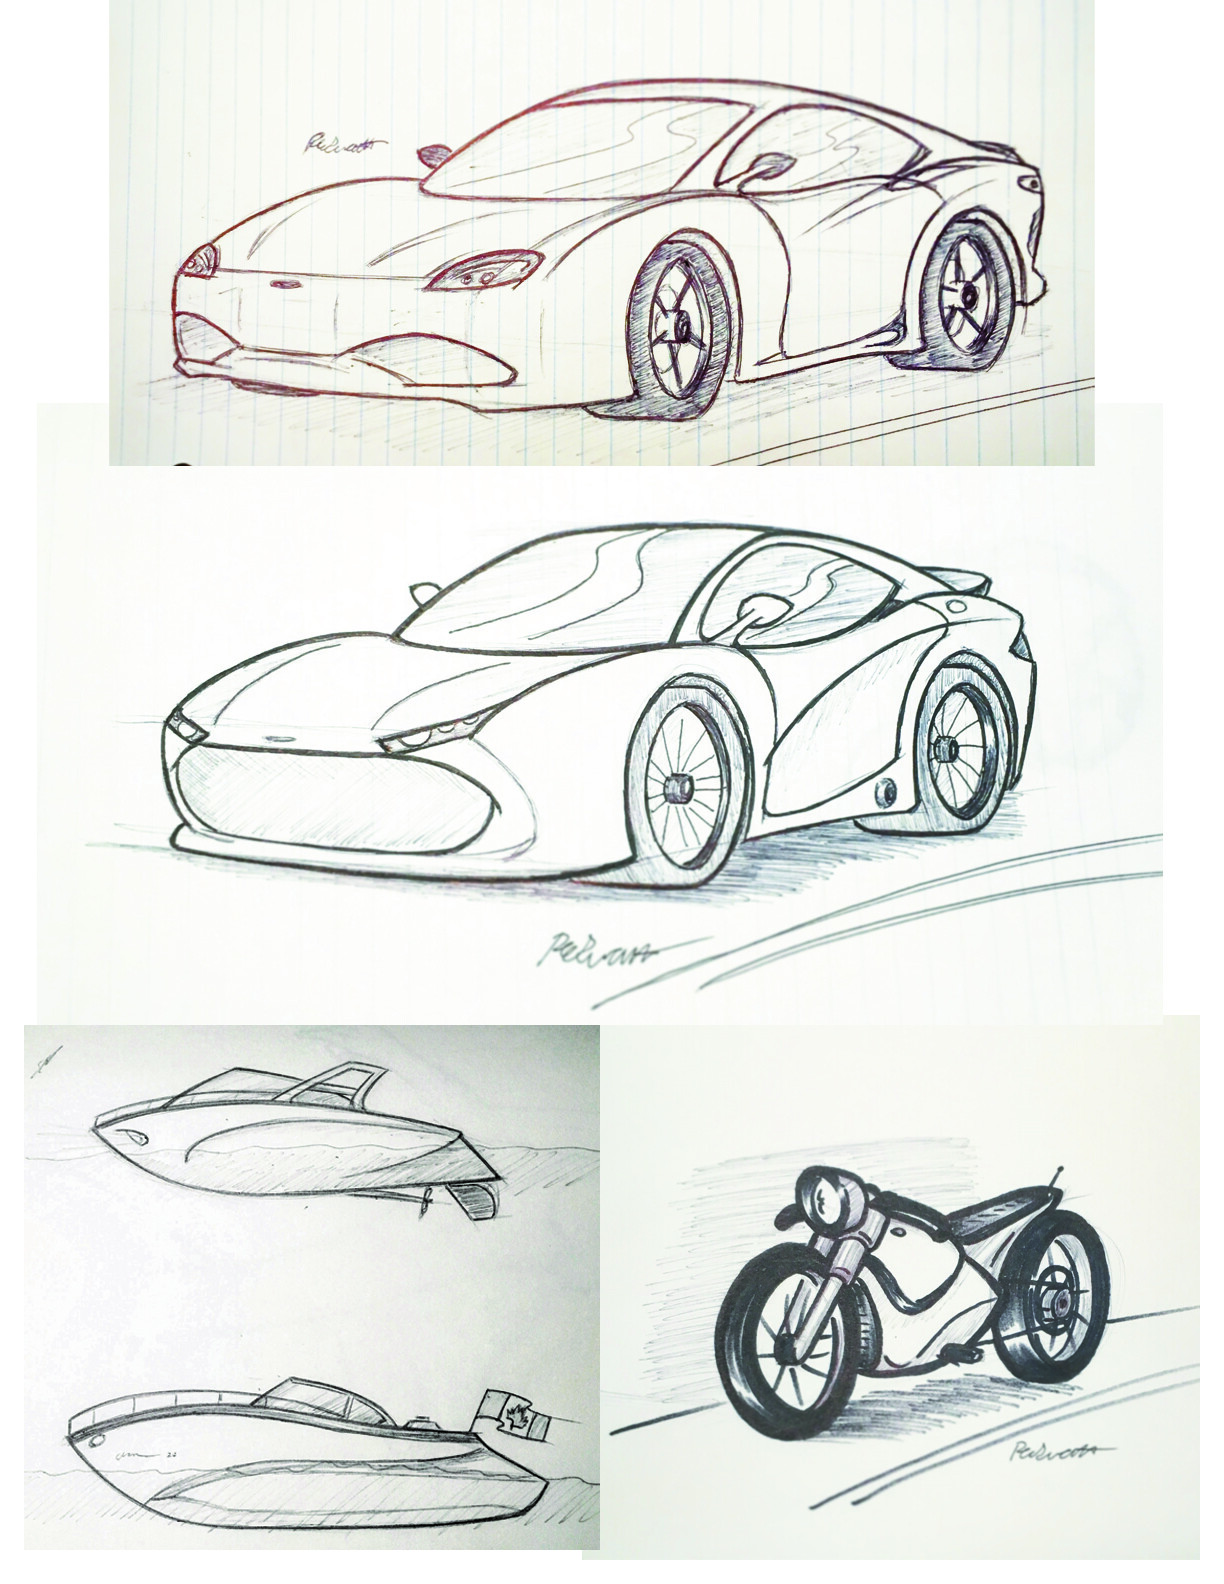 Online Course: How To Sketch, Design, Draw Cars Like a Pro (Pen & Paper  Edition) from Skillshare | Class Central